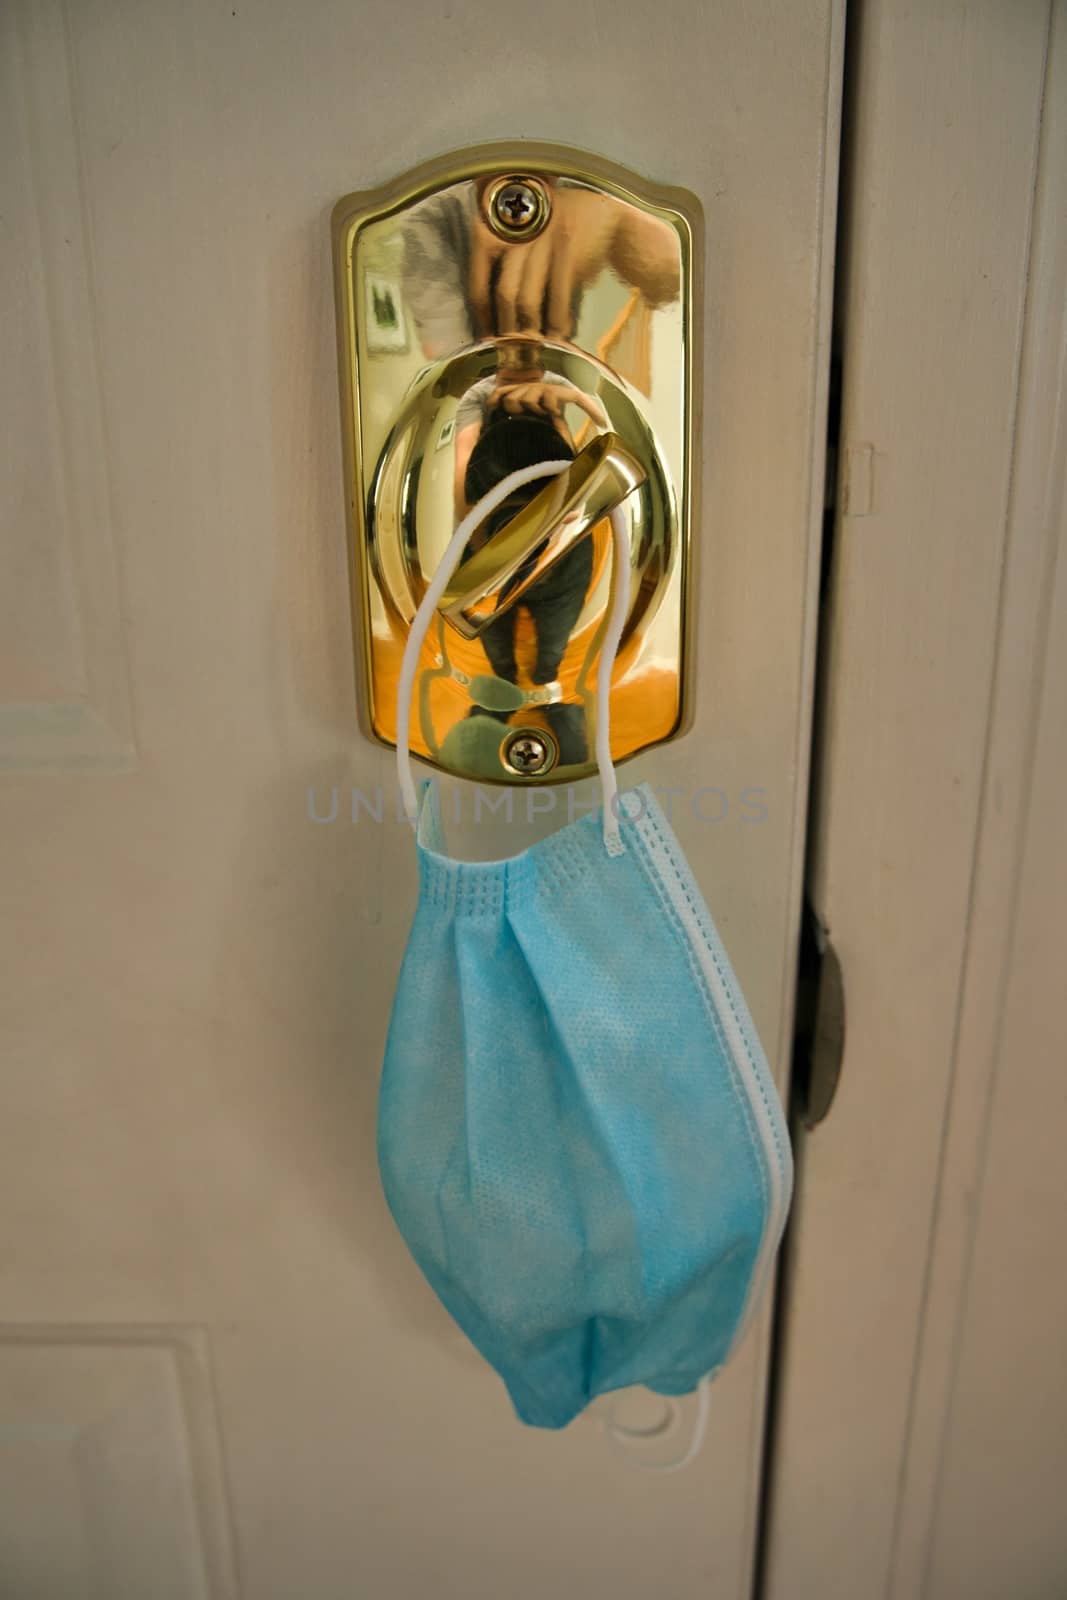 Blue mask hanging from lock as a reminder to wear facemask when leaving home to protect face, nose, and mouth from coronavirus